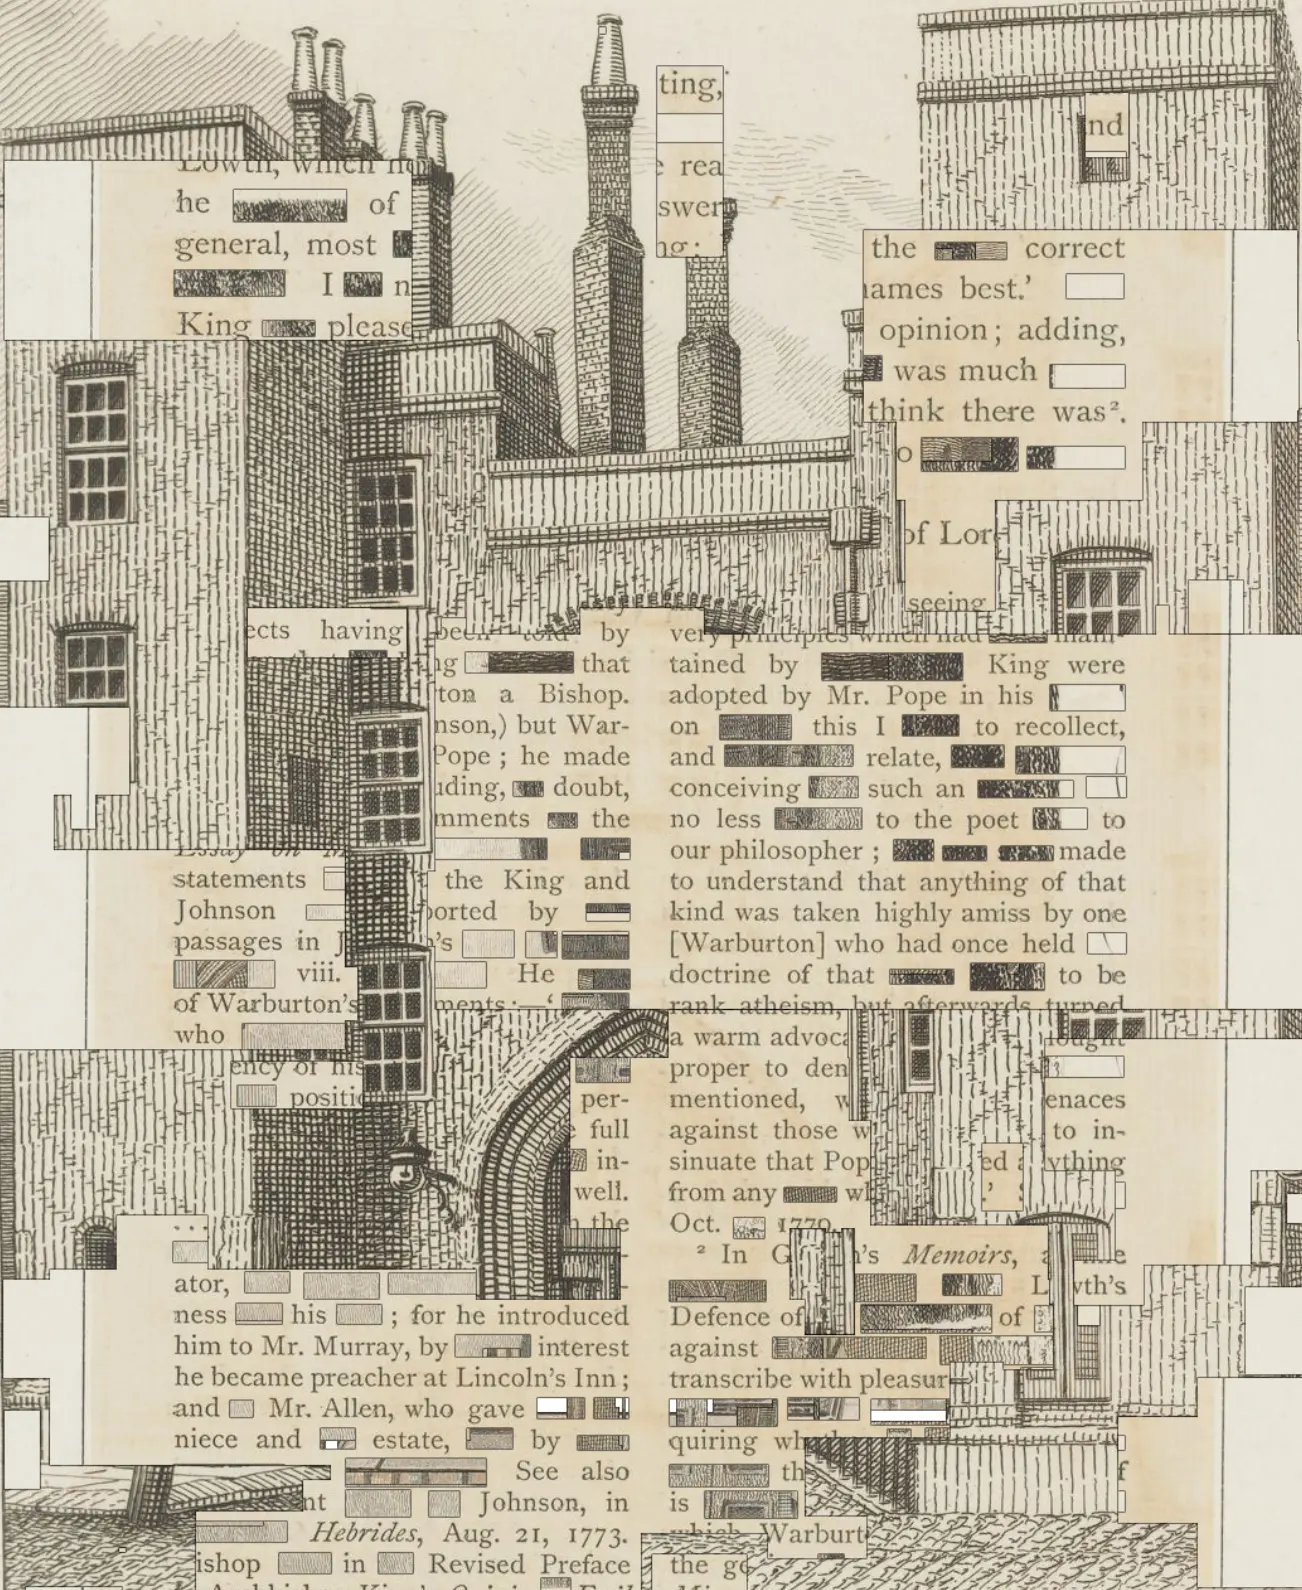 Drawing of a castle with visible text cutting through